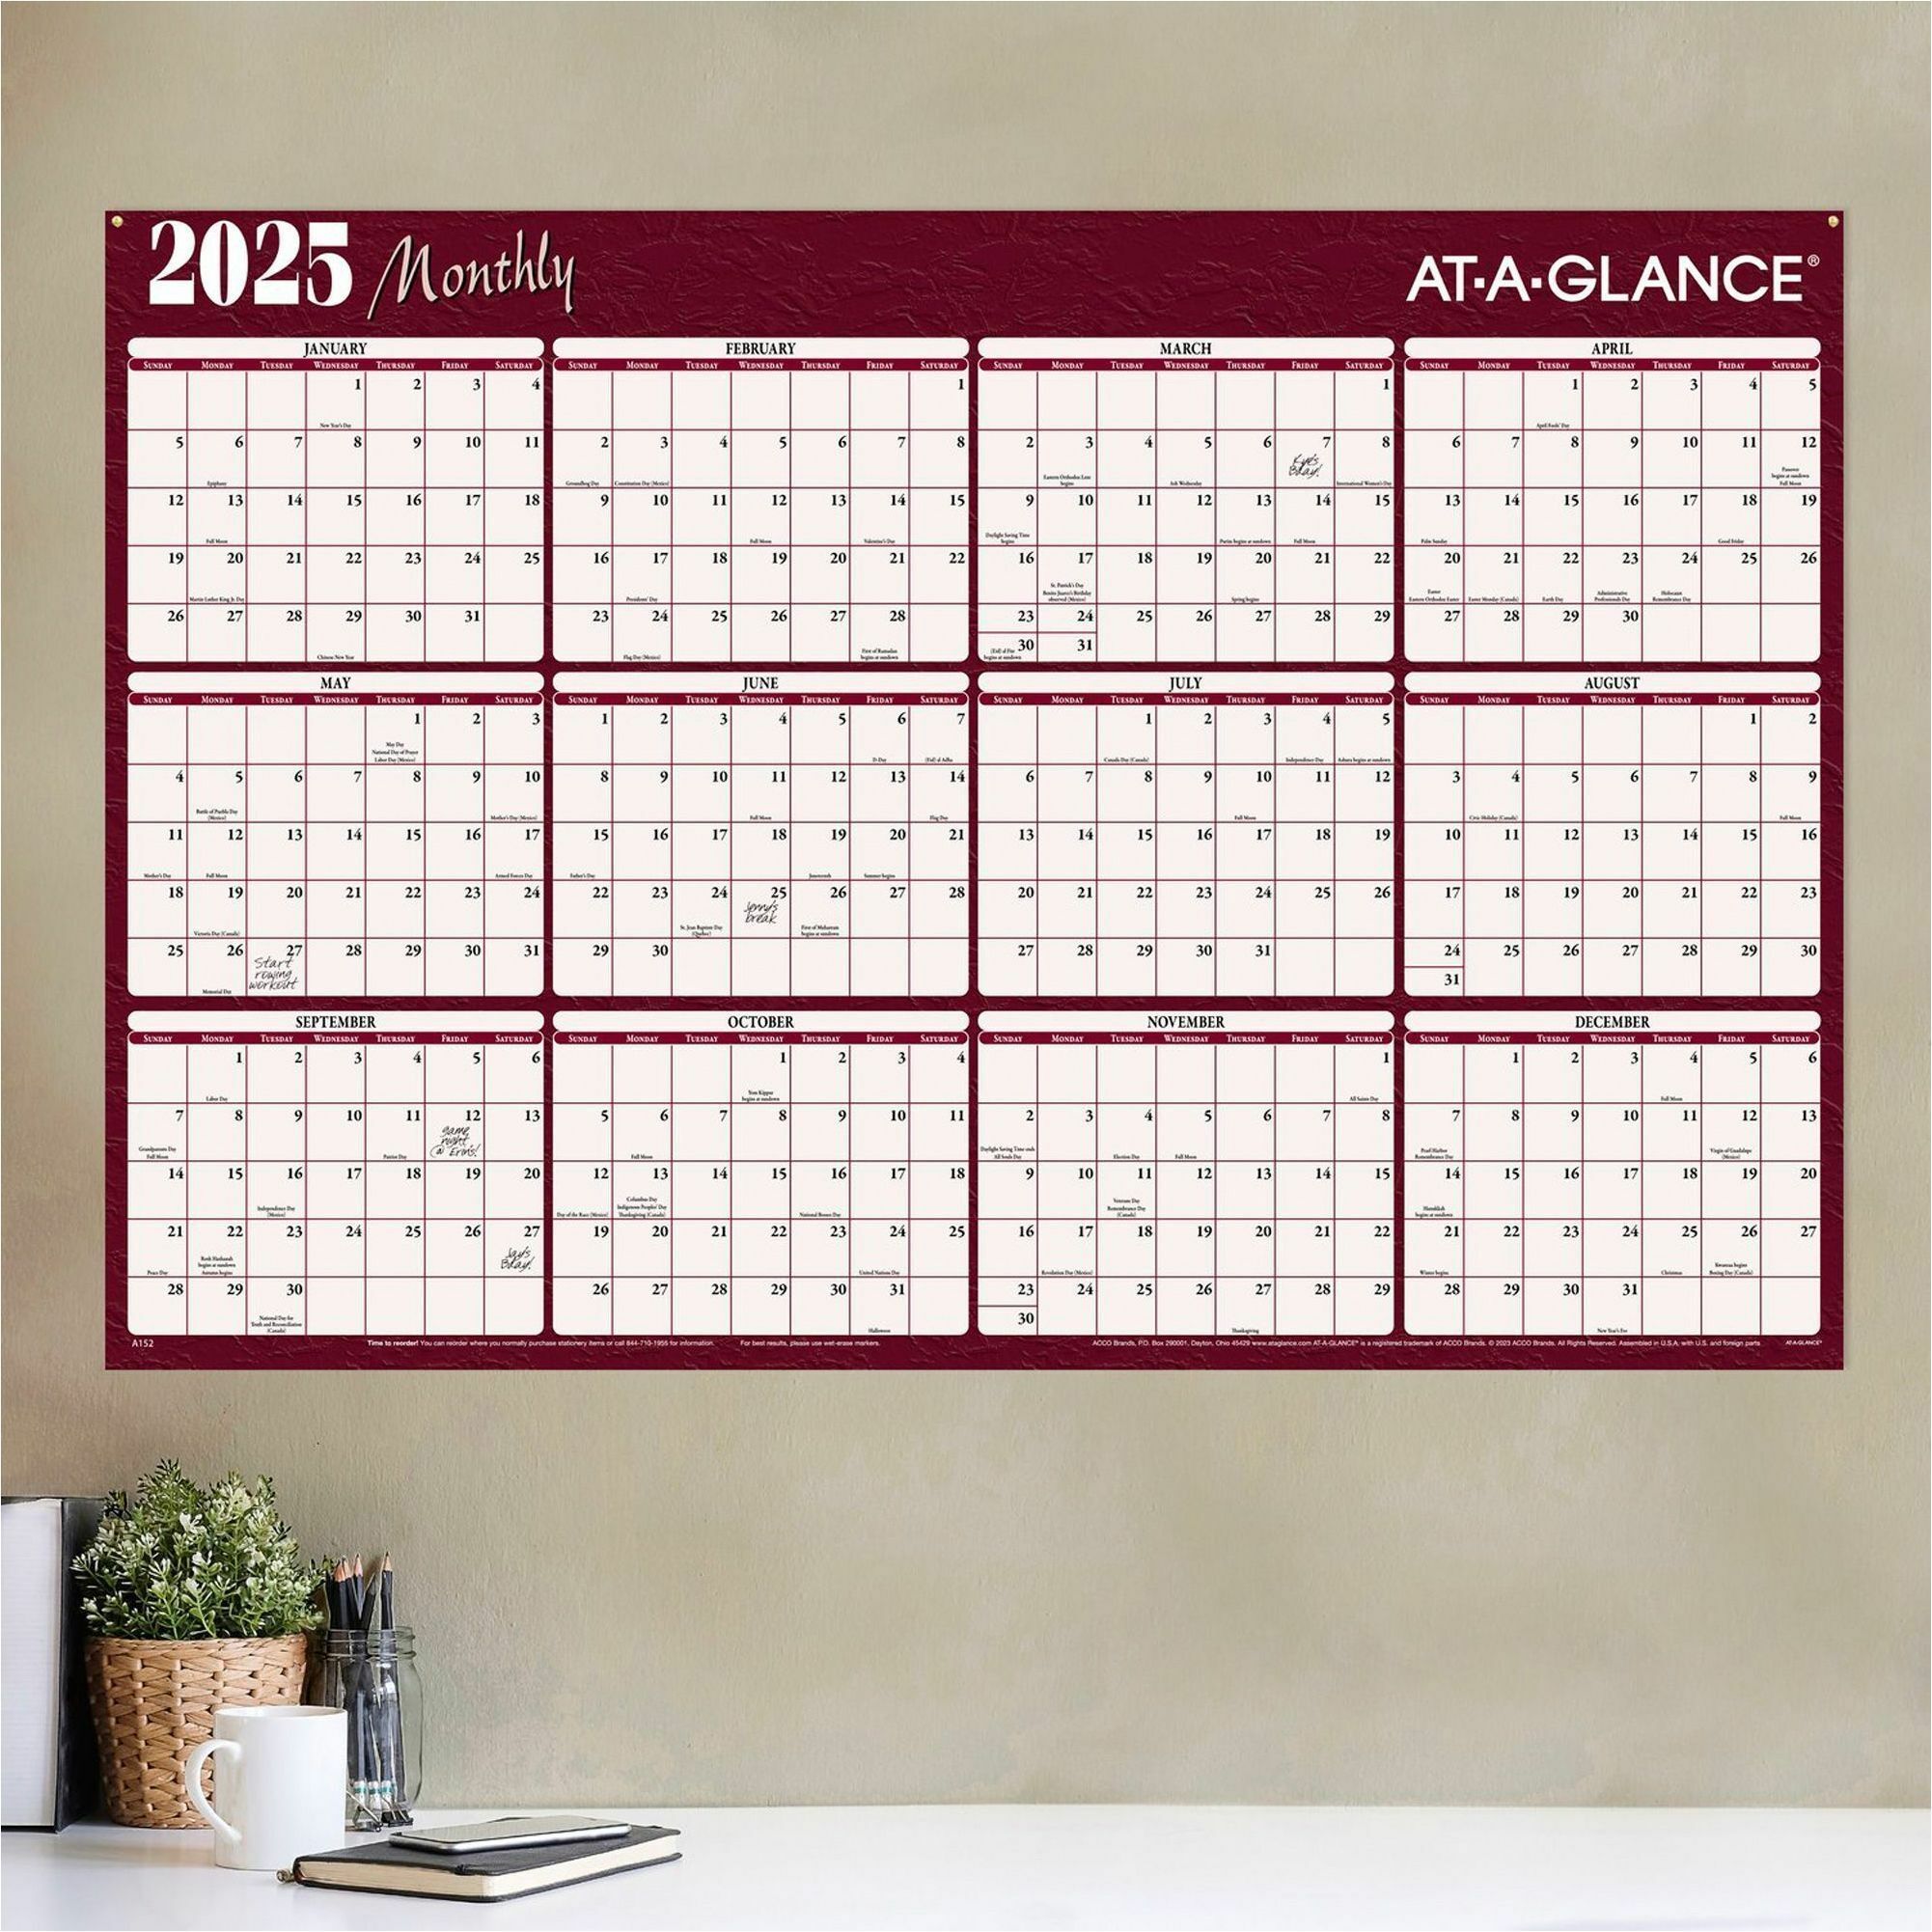 at-a-glance-erasable-reversible-horizontal-yearly-wall-planner-wall-calendars-acco-brands